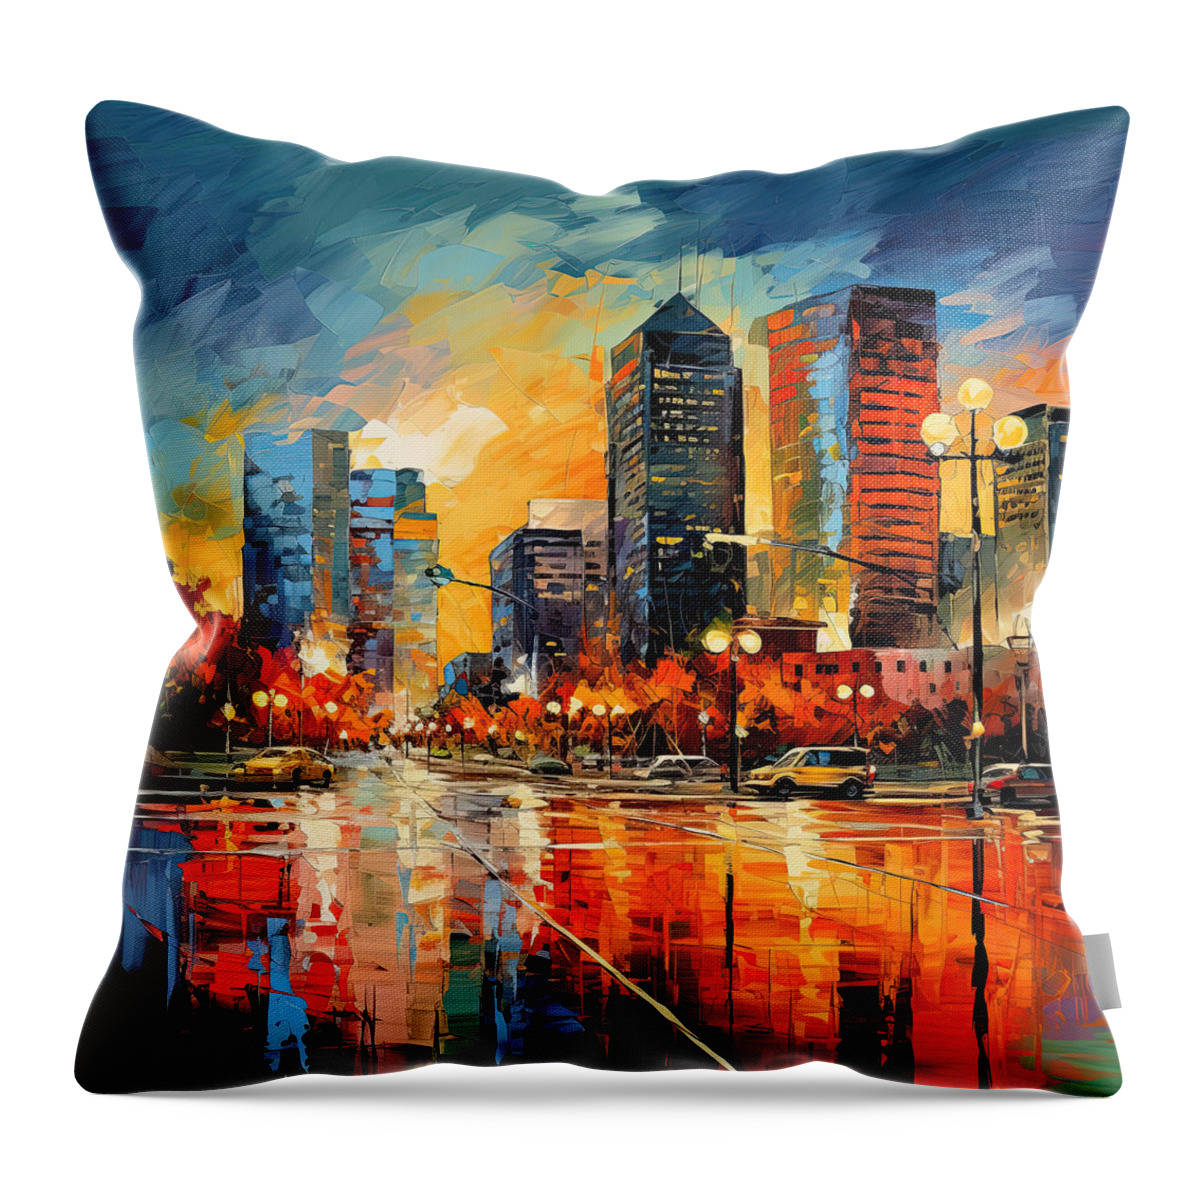 Downtown Louisville Throw Pillow featuring the painting Downtown Louisville - Colorful Abstract Art by Lourry Legarde